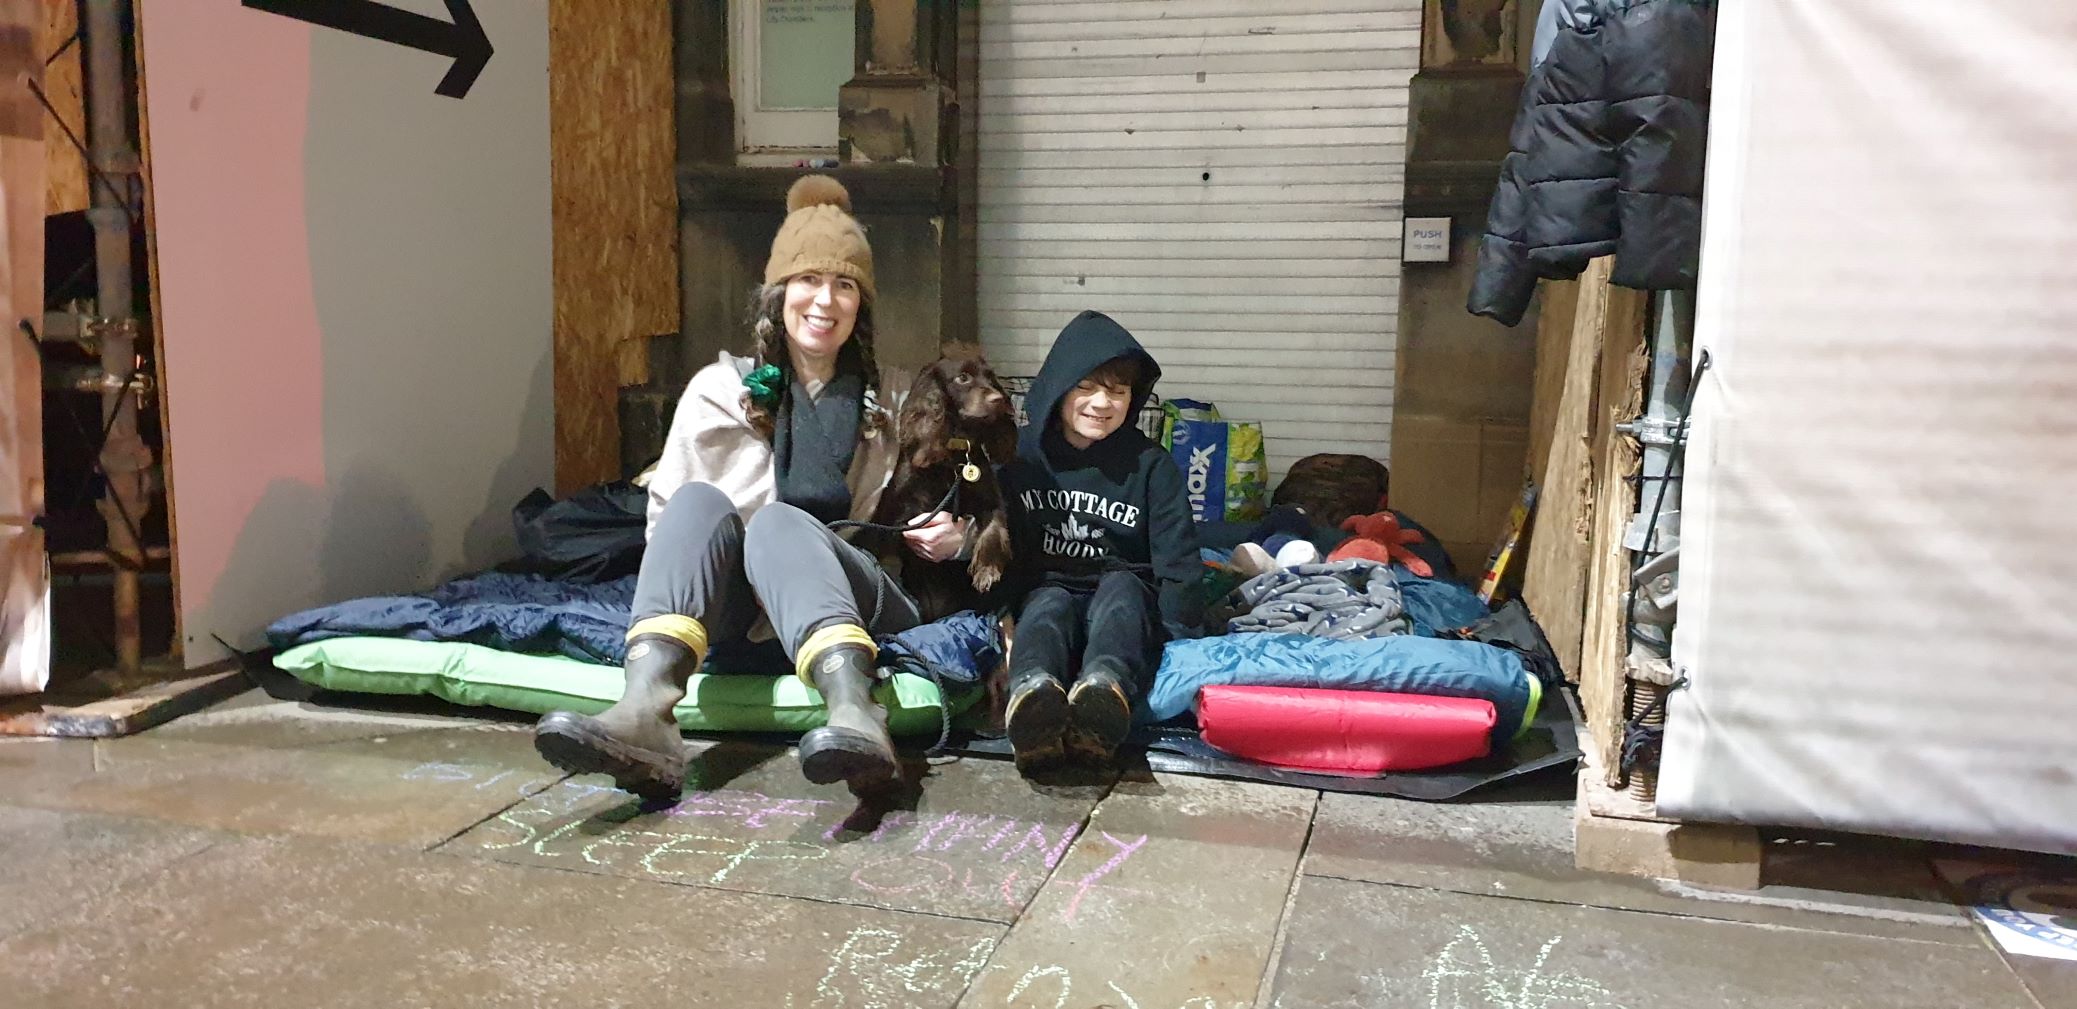 Annual Sleep Out to end homelessness returns across Scotland this March  